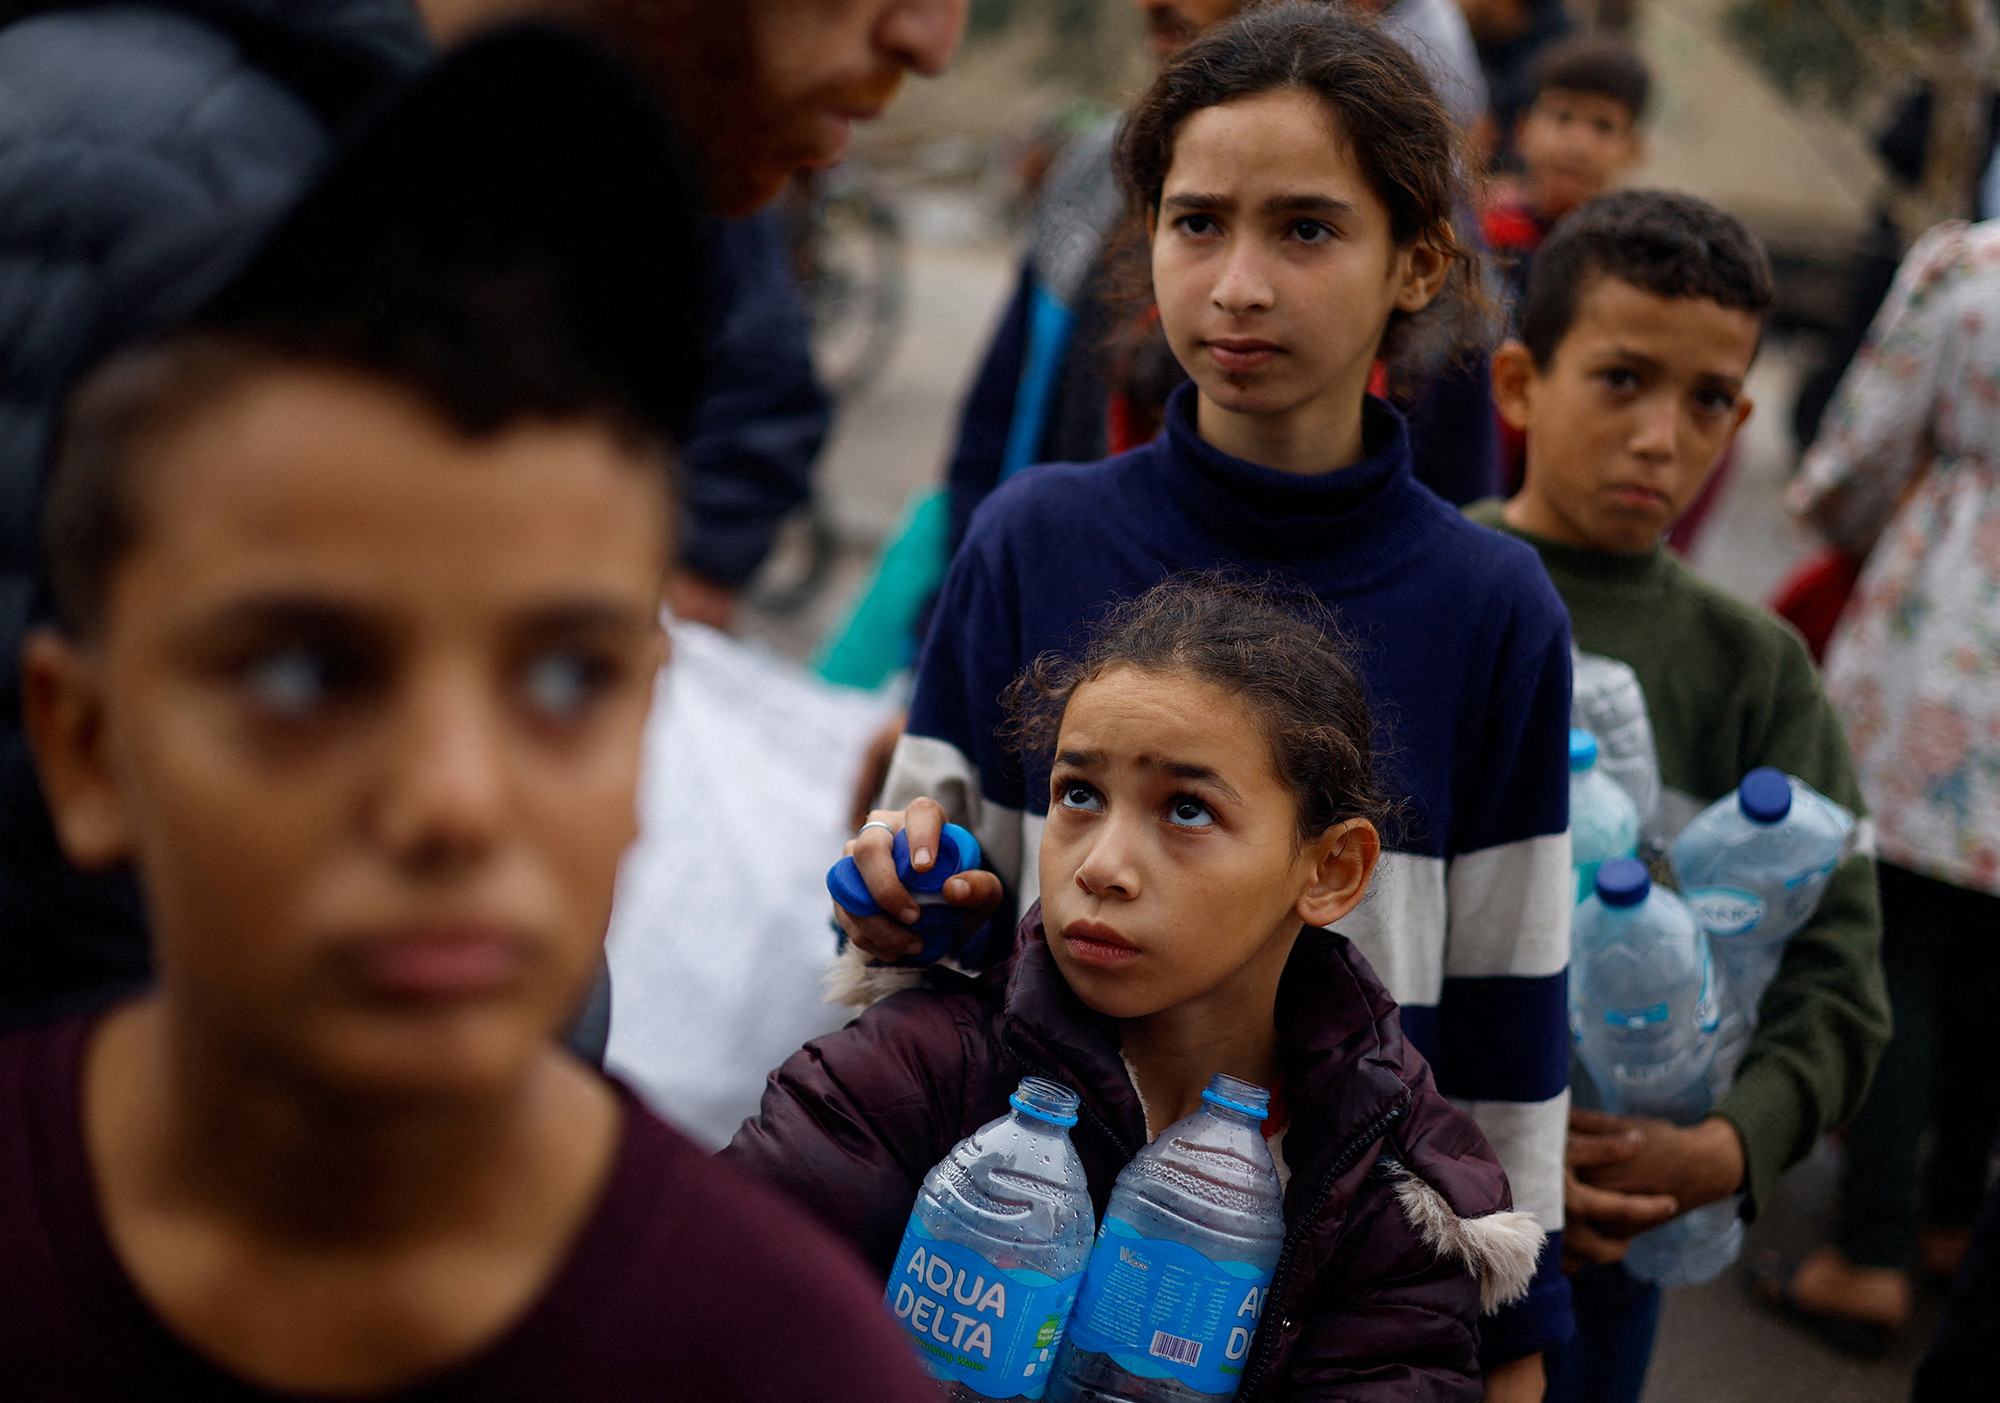 A Palestinian girl holds empty water bottles as she queues to collect water amid water shortages in Rafah, Gaza, on December 5.